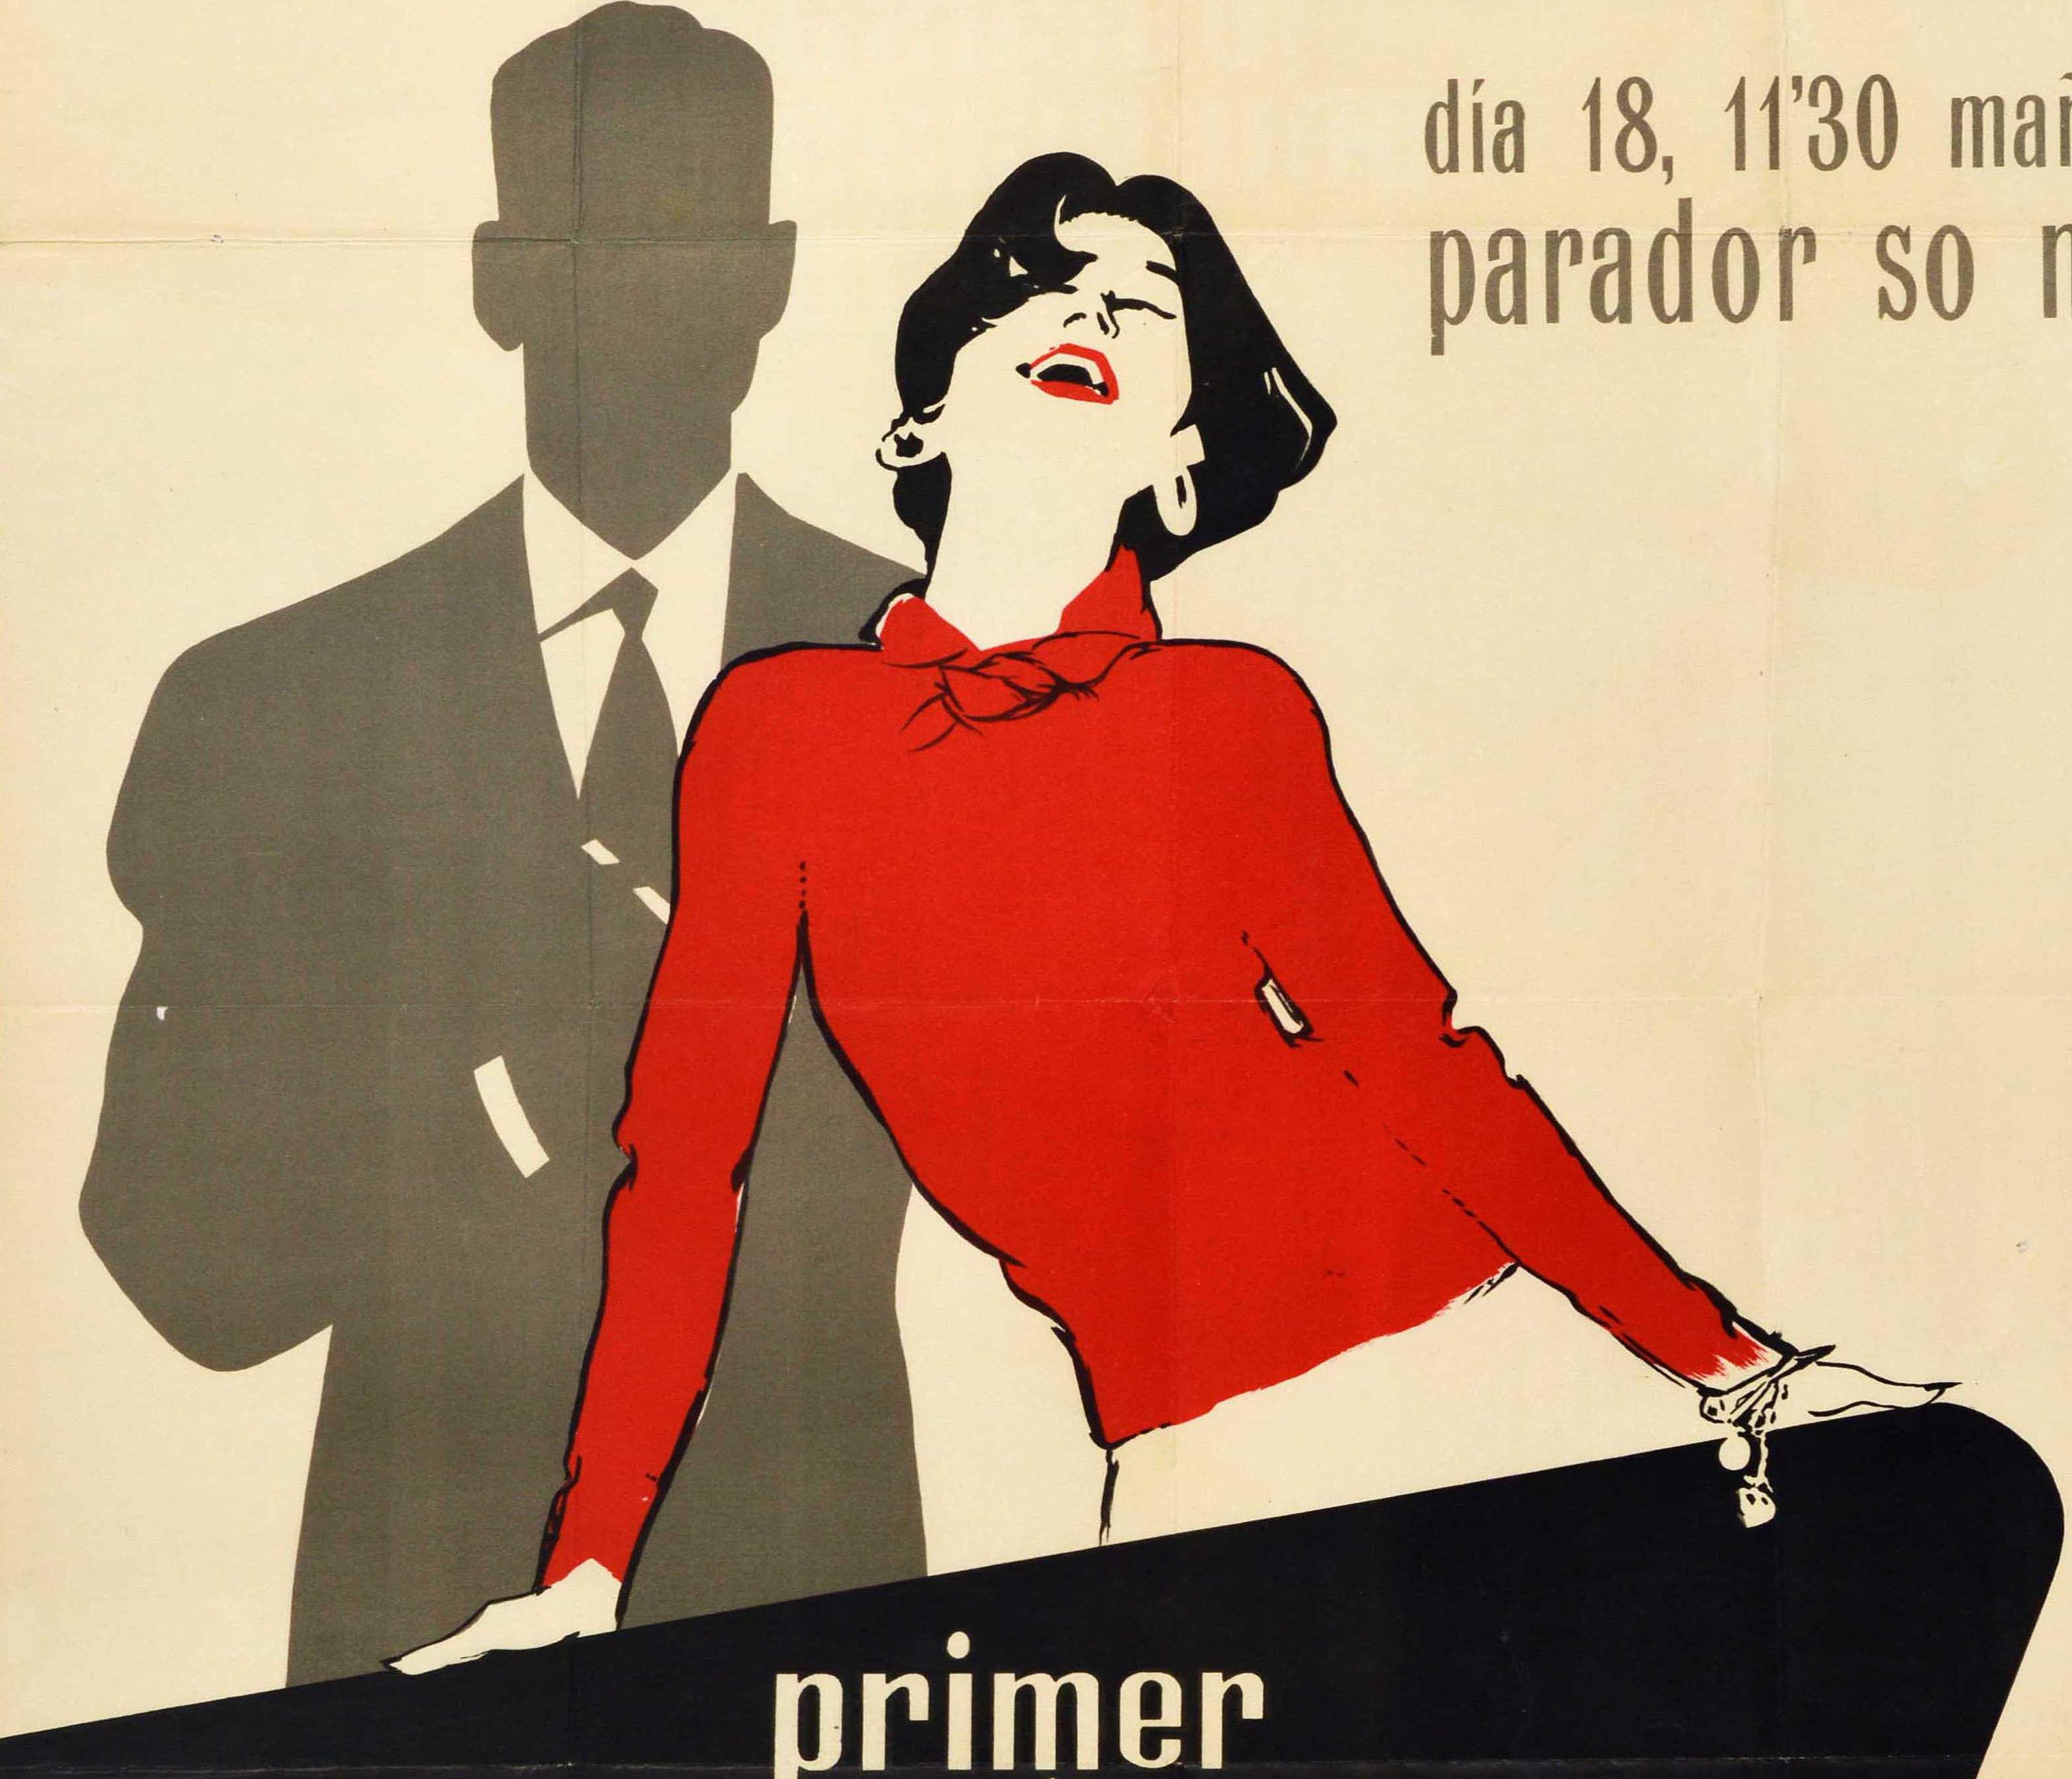 Original vintage advertising poster for the First Spanish Fashion Contest / Primer Certamen Espanol de la Moda featuring an illustration of a smiling lady with short black hair dressed in a red top and leaning on a table with a silhouette of a man